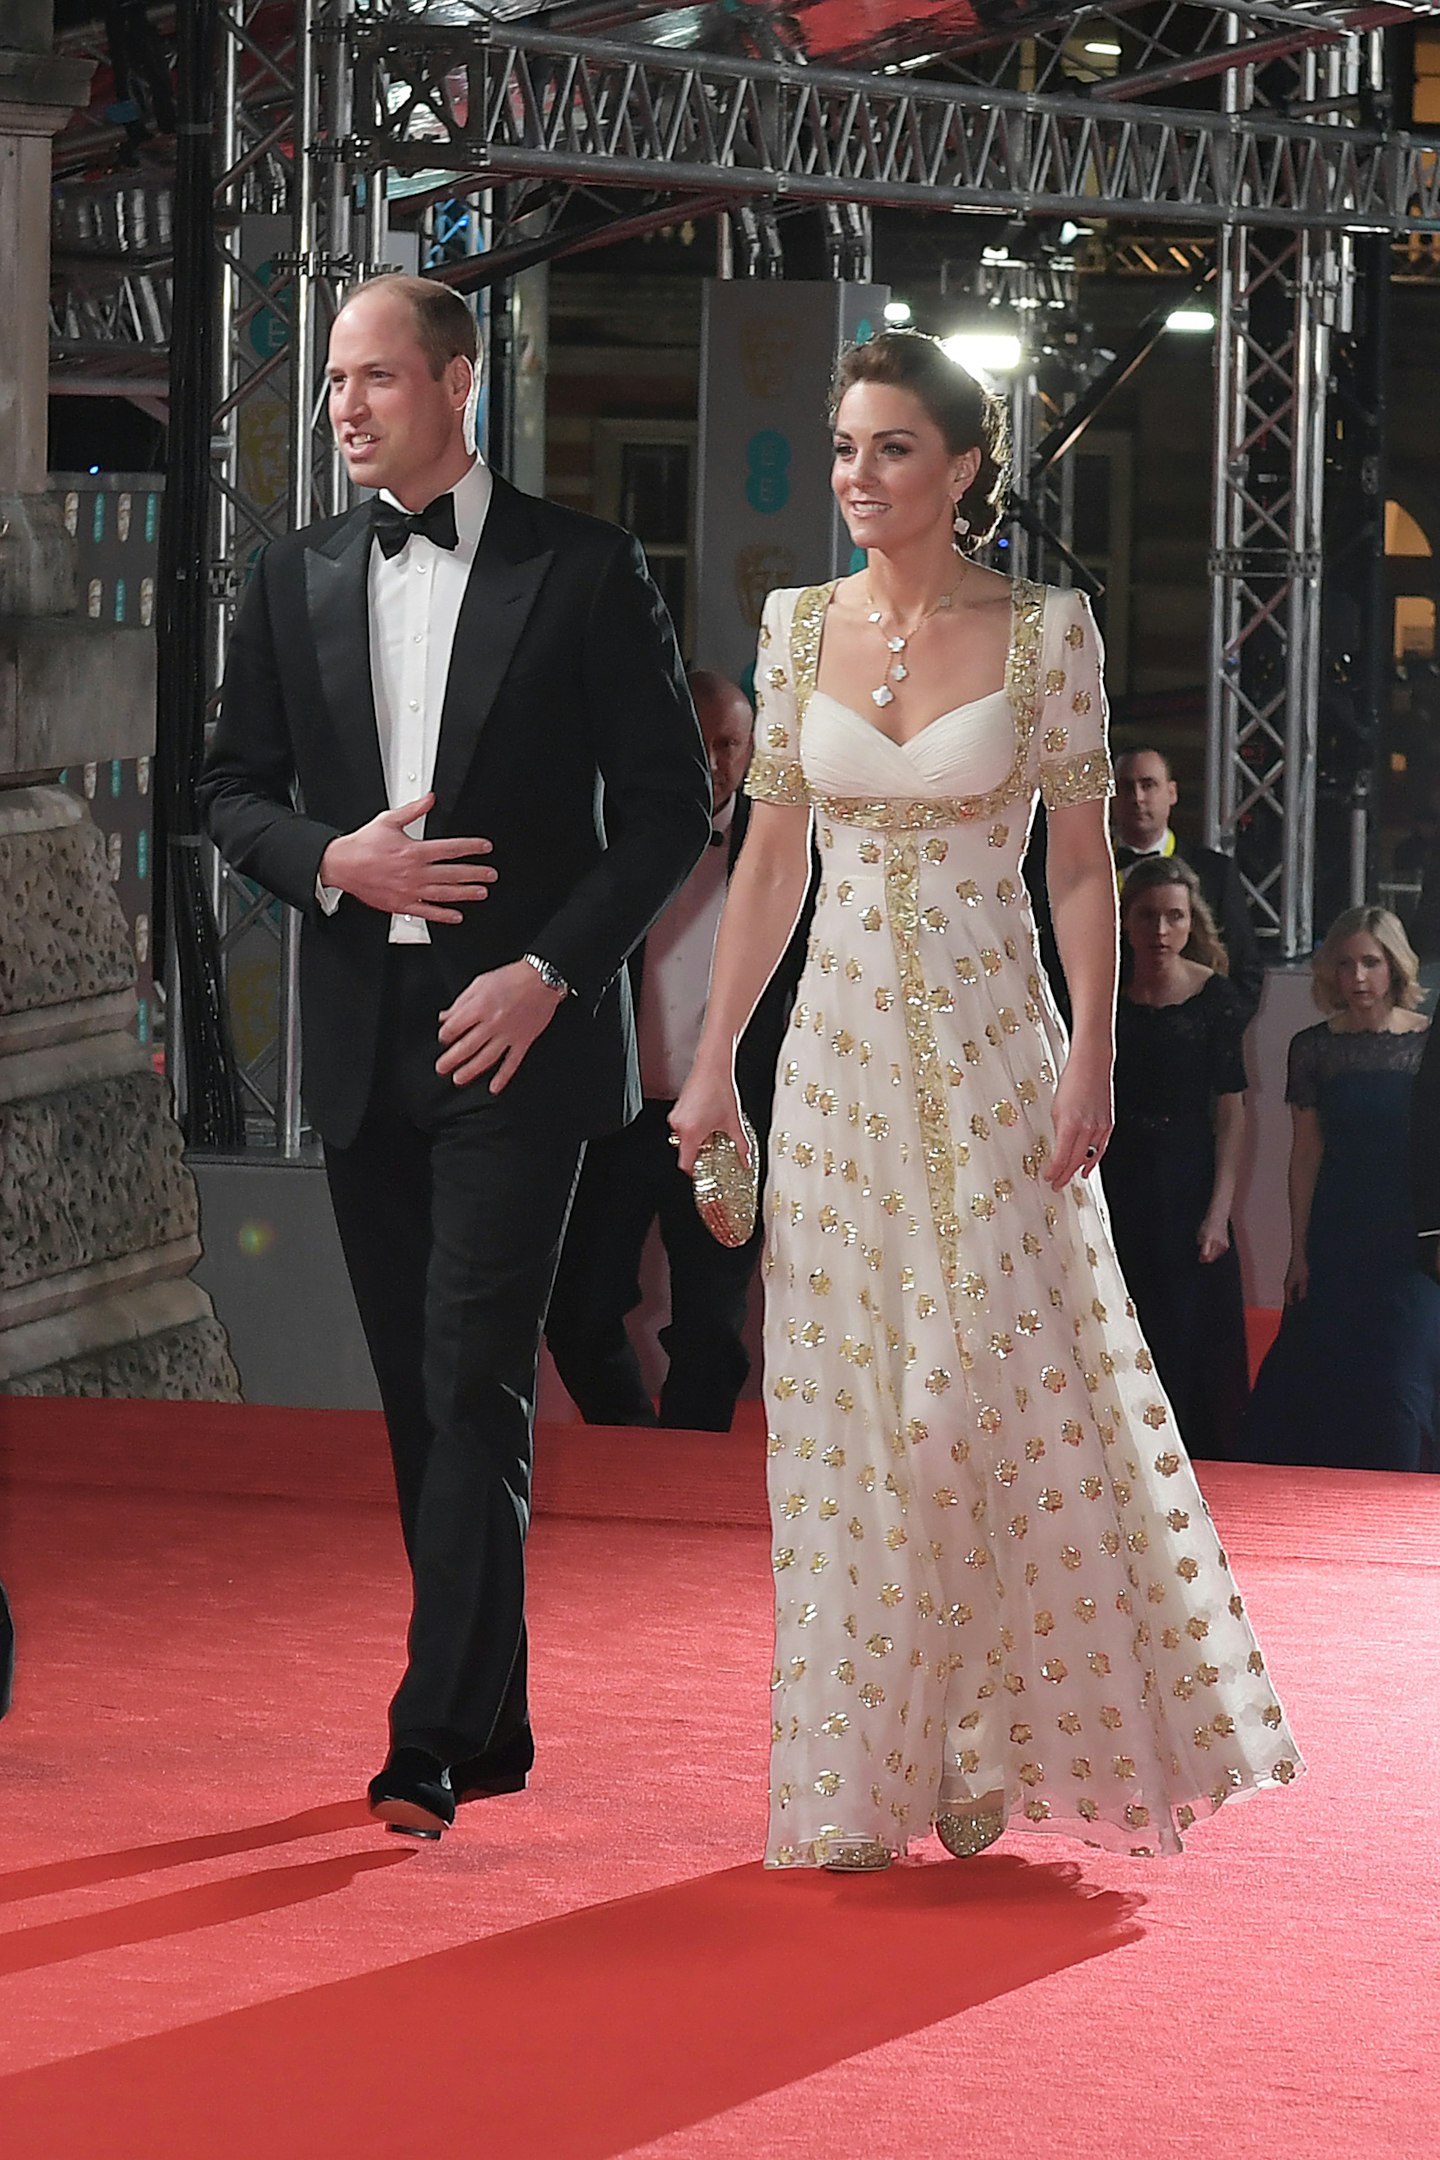 The Duchess of Cambridge wearing an Alexander McQueen gown that she last wore in September 2012 as part of the Diamond Jubilee tour in Malaysia